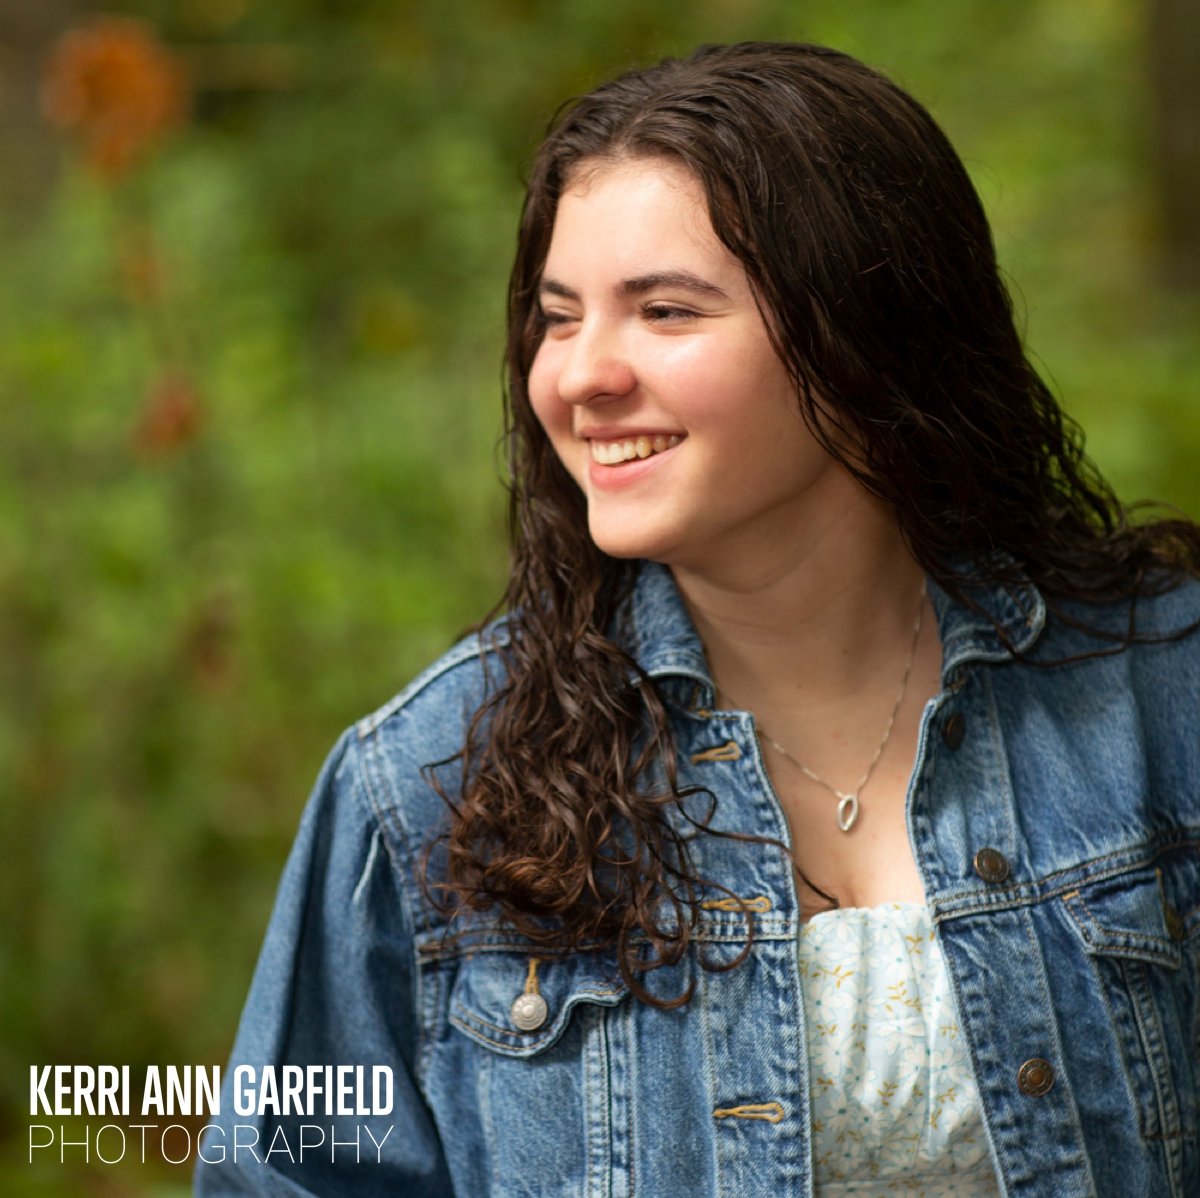 We had such a lovely senior photoshoot with Emma this past fall. She has a beautiful smile and I love all of her photos. I hope you are enjoying the rest of your senior year, Emma! 

  @sasha7911 @emma.callahan3 

#kerrianngarfield #2023seniors #seni